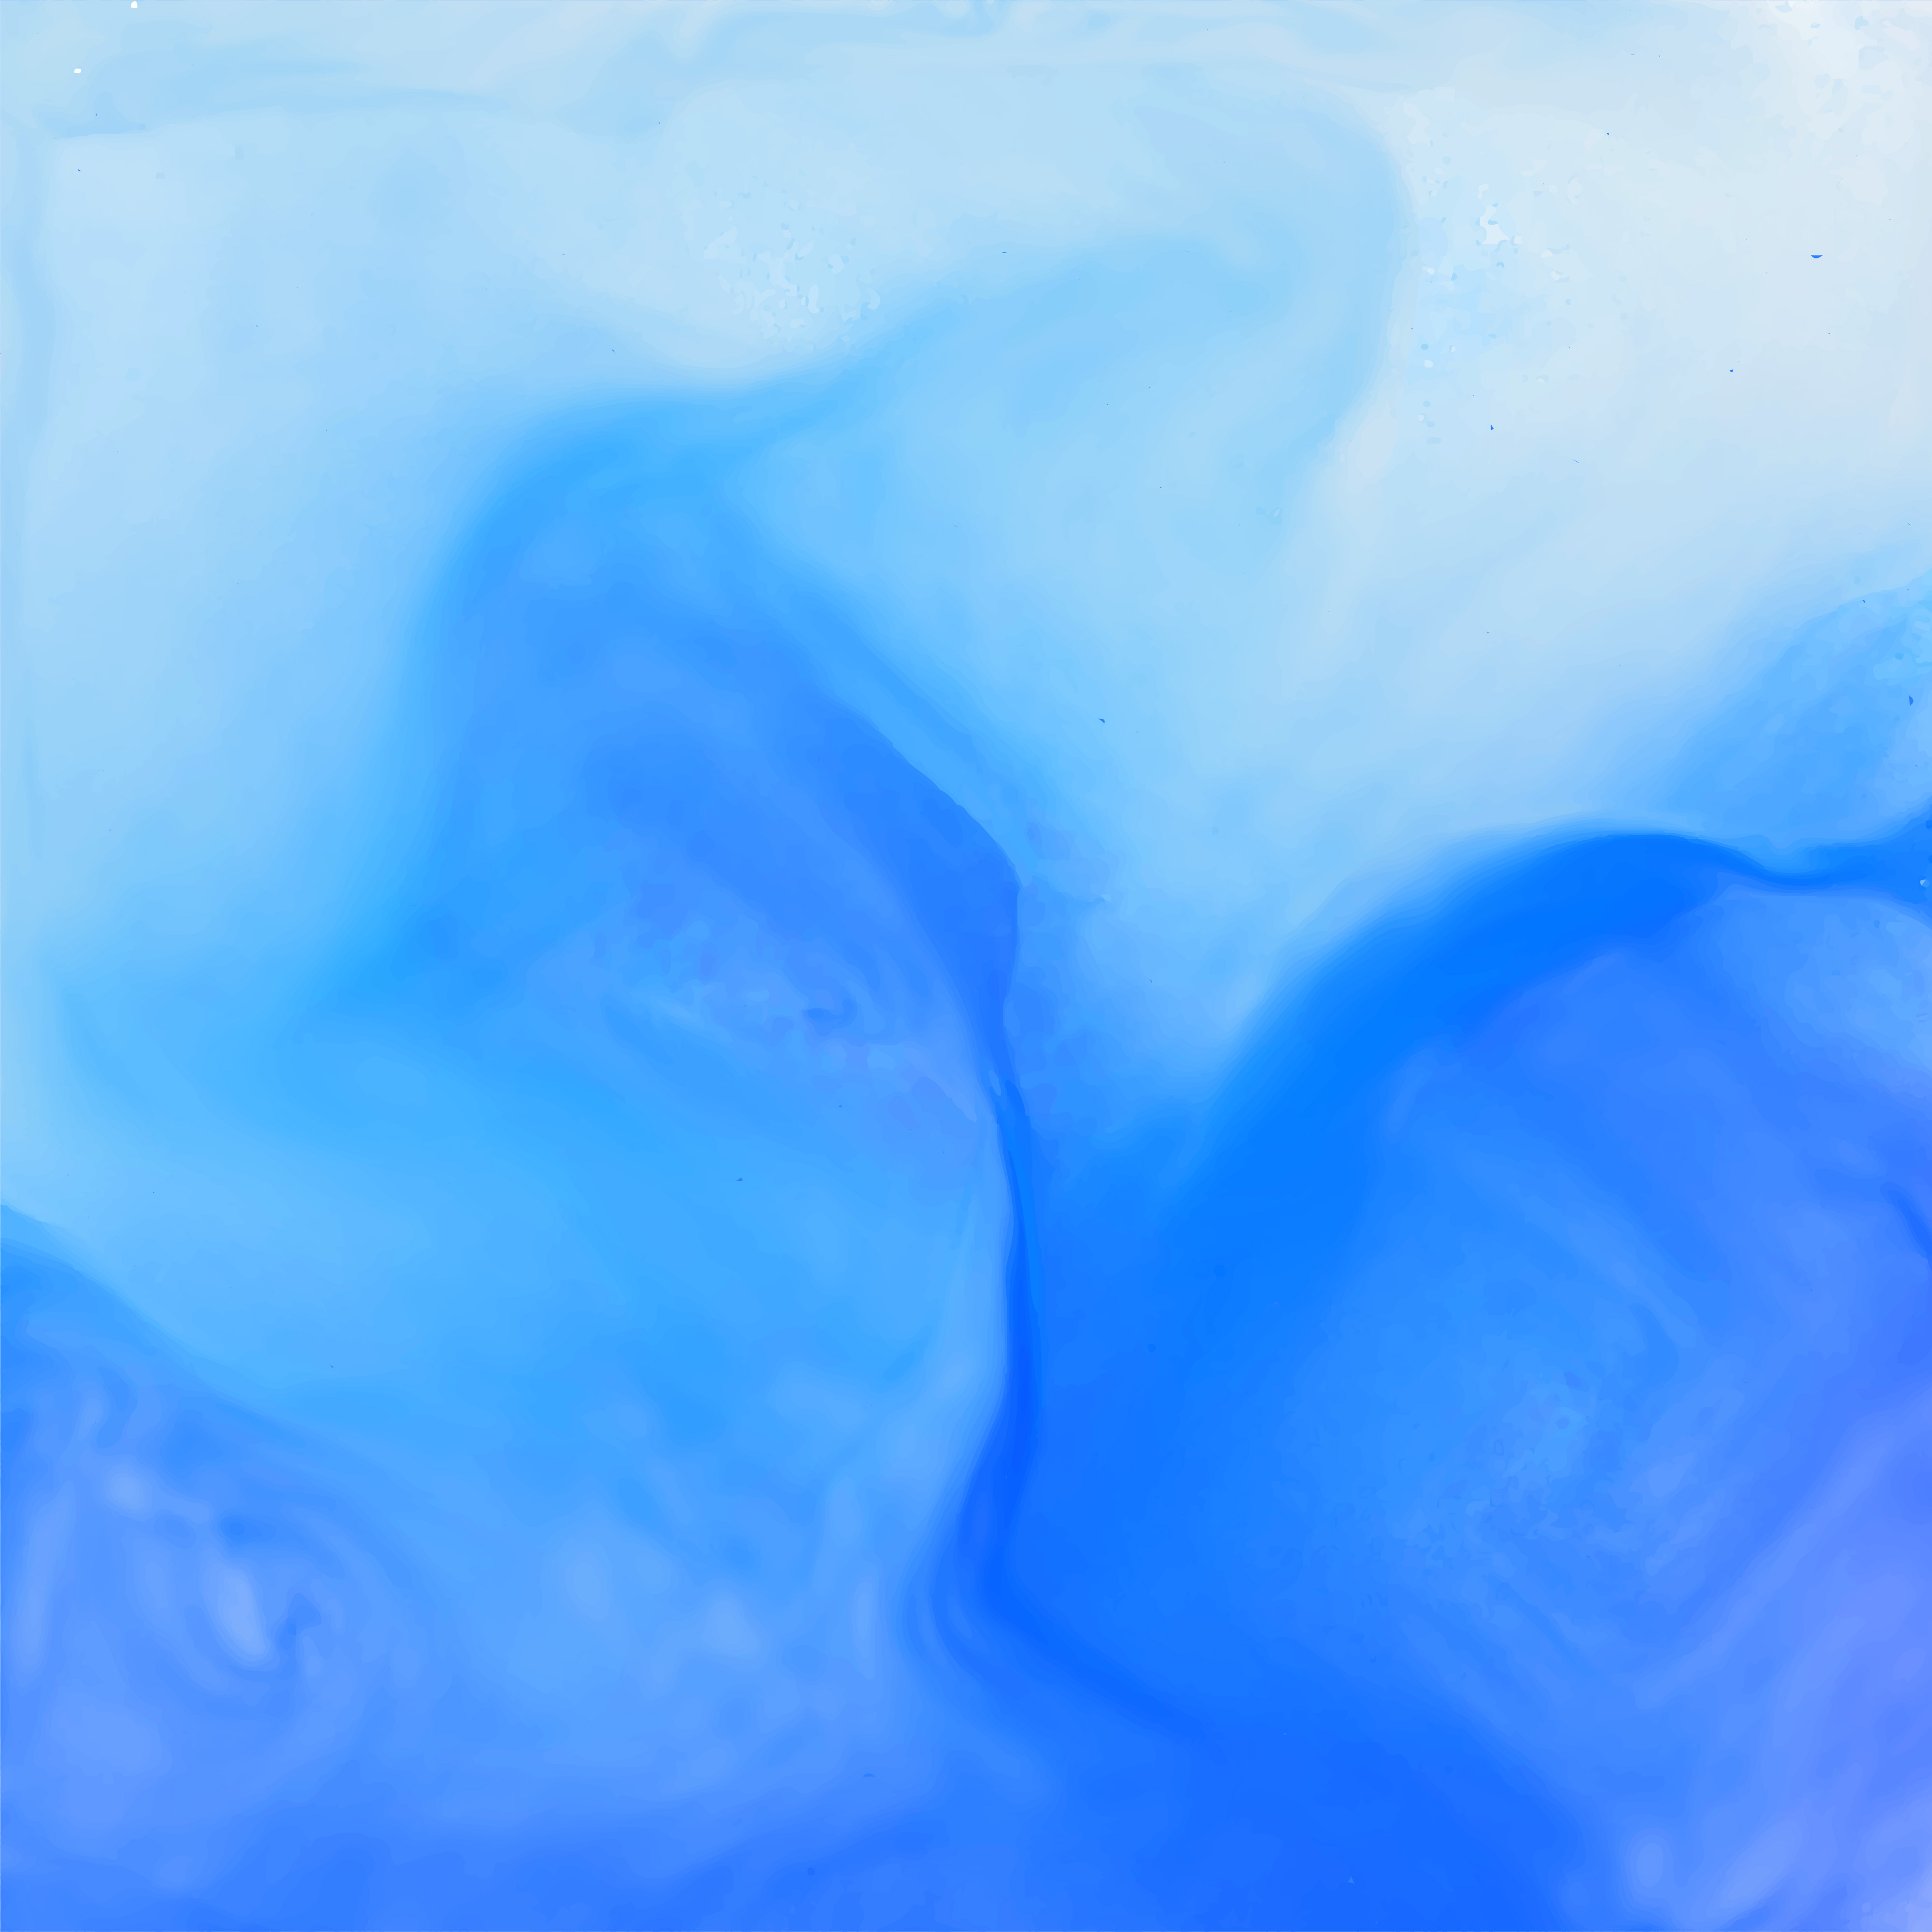 Download blue watercolor ink effect background - Download Free Vector Art, Stock Graphics & Images